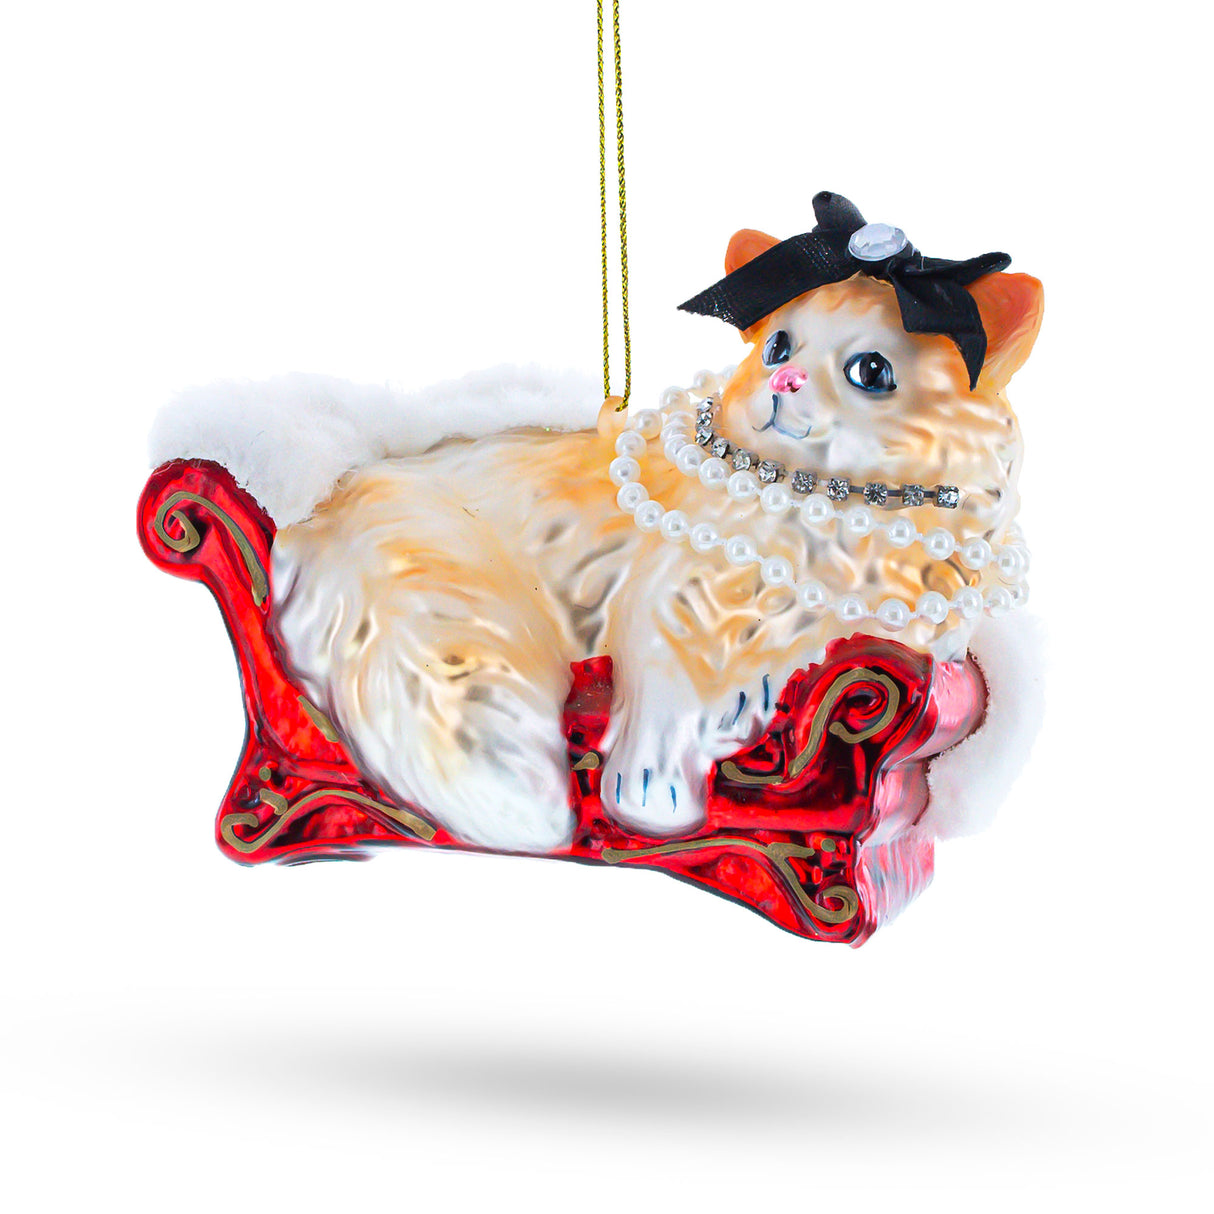 Elegant Cat in Pearl Necklace Lounging on Luxurious Sofa - Blown Glass Christmas Ornament in Beige color,  shape